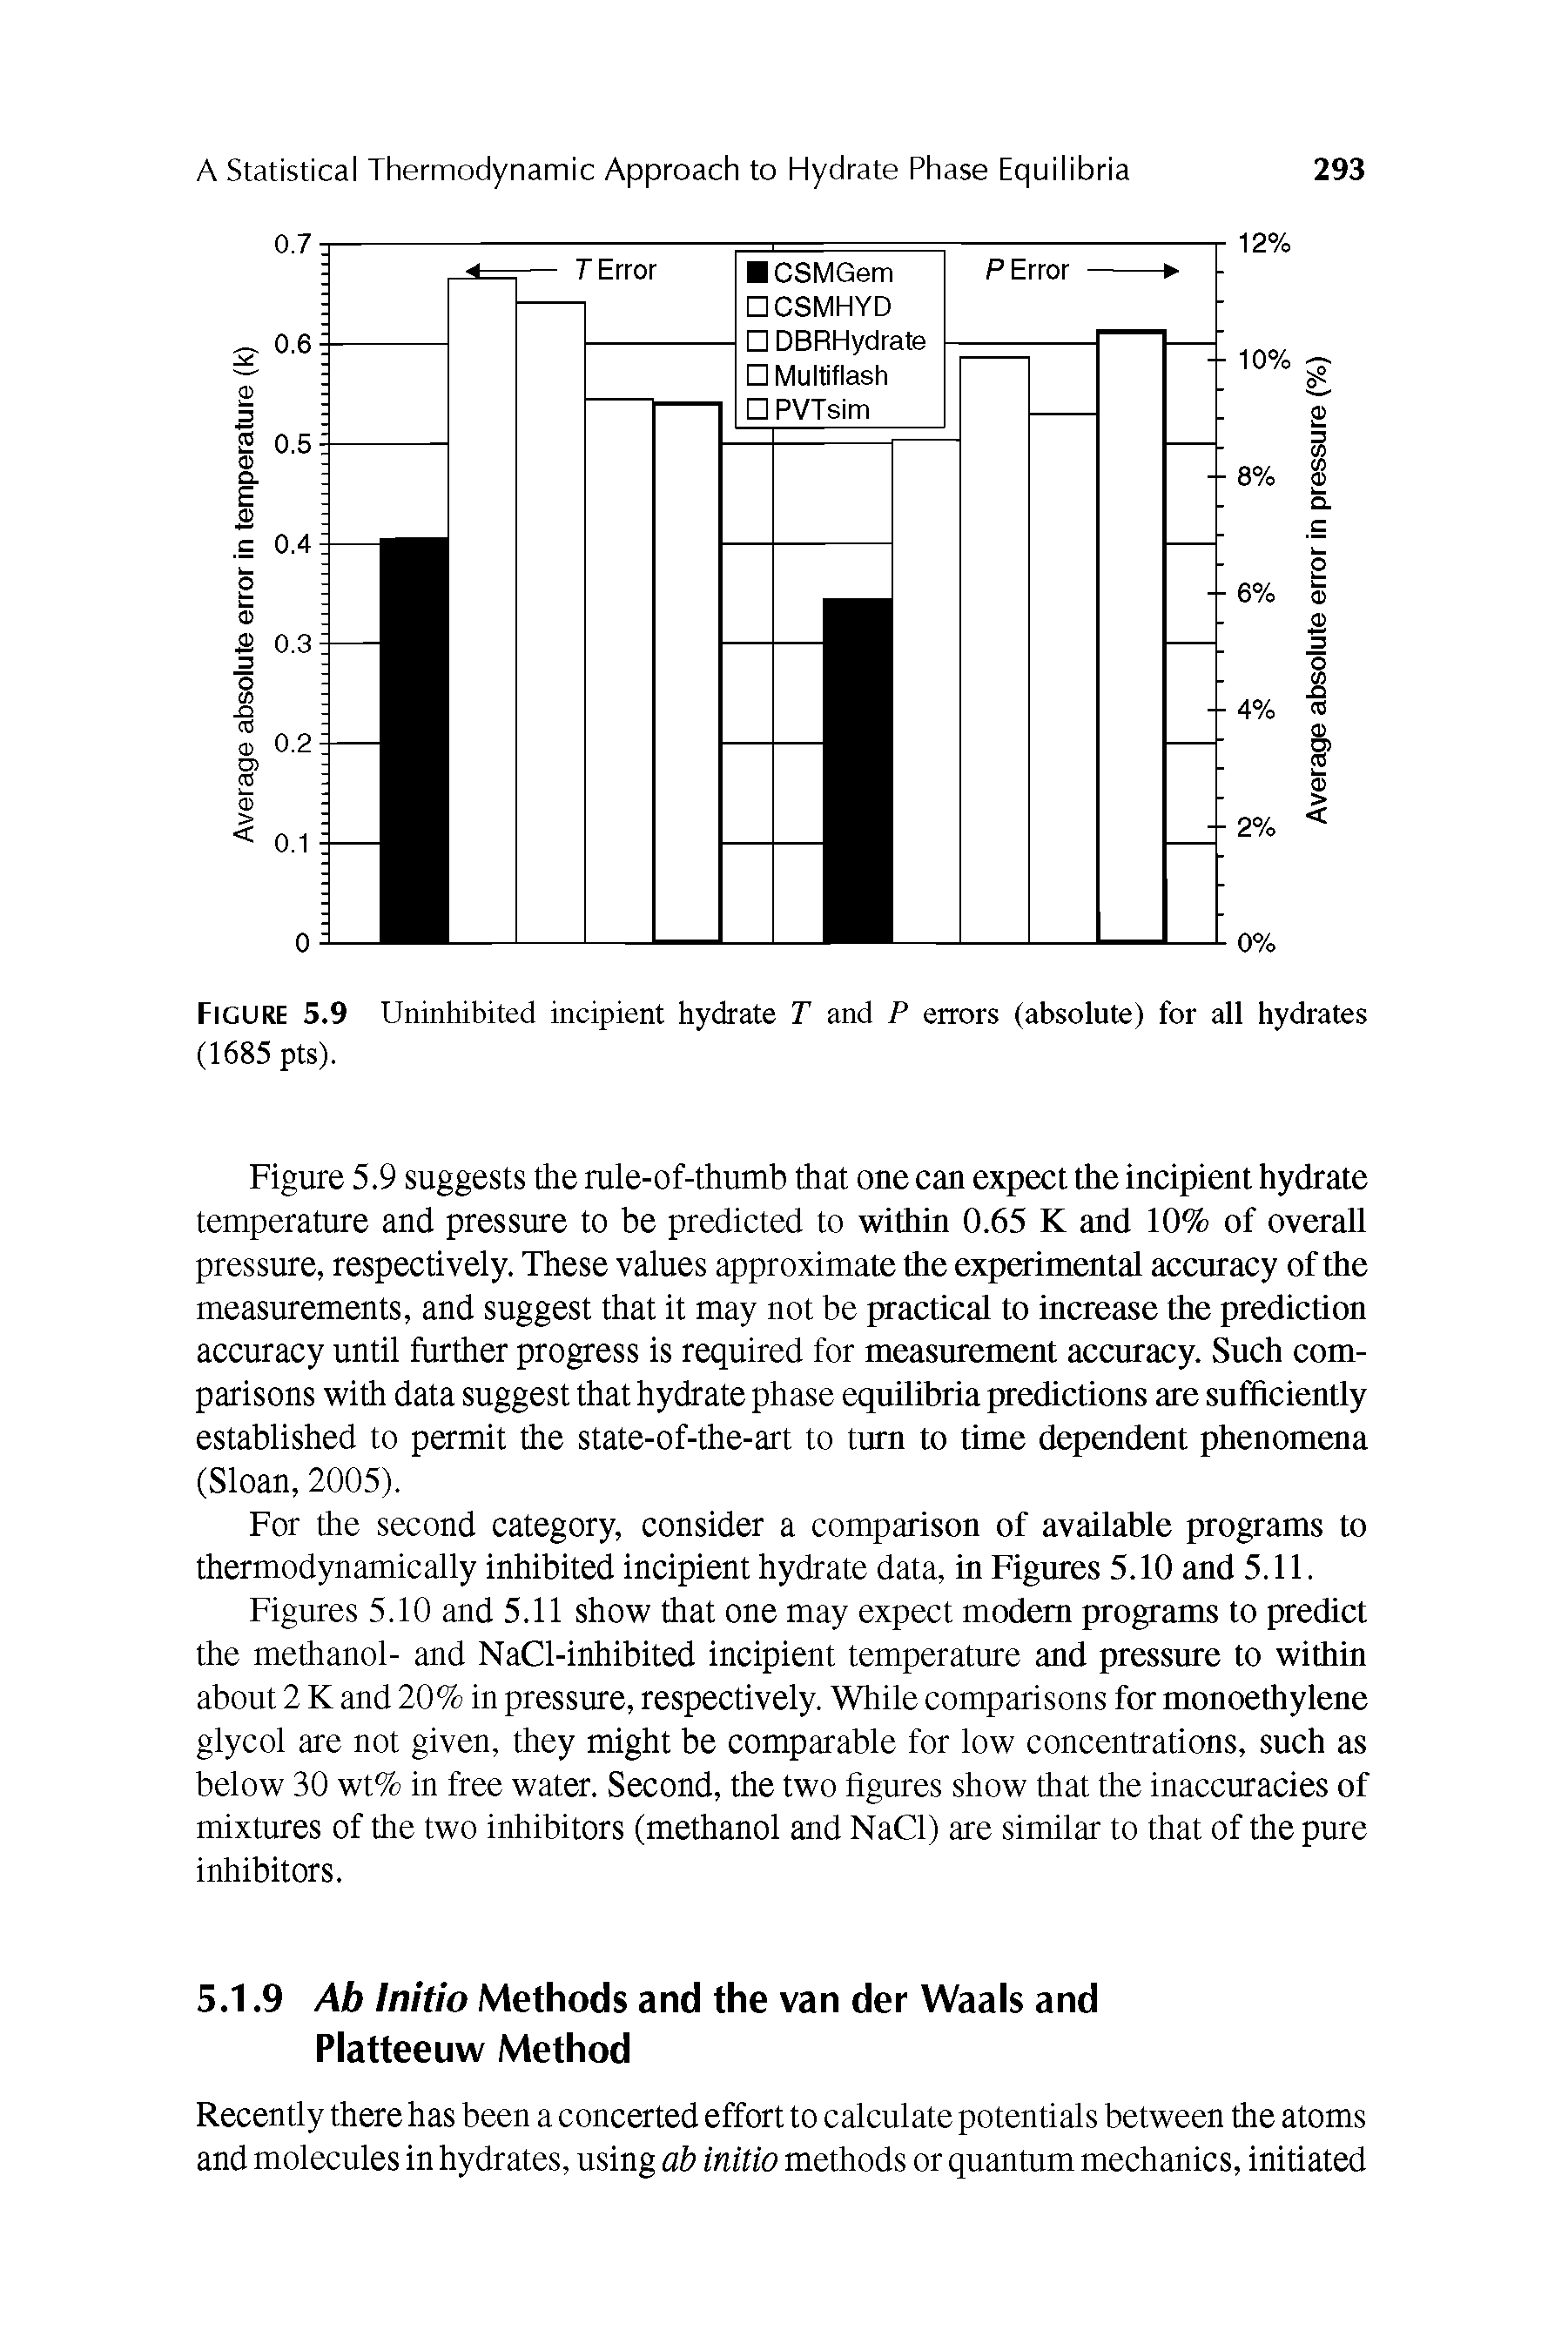 Figures 5.10 and 5.11 show that one may expect modem programs to predict the methanol- and NaCl-inhibited incipient temperature and pressure to within about 2 K and 20% in pressure, respectively. While comparisons for monoethylene glycol are not given, they might be comparable for low concentrations, such as below 30 wt% in free water. Second, the two figures show that the inaccuracies of mixtures of the two inhibitors (methanol and NaCl) are similar to that of the pure inhibitors.